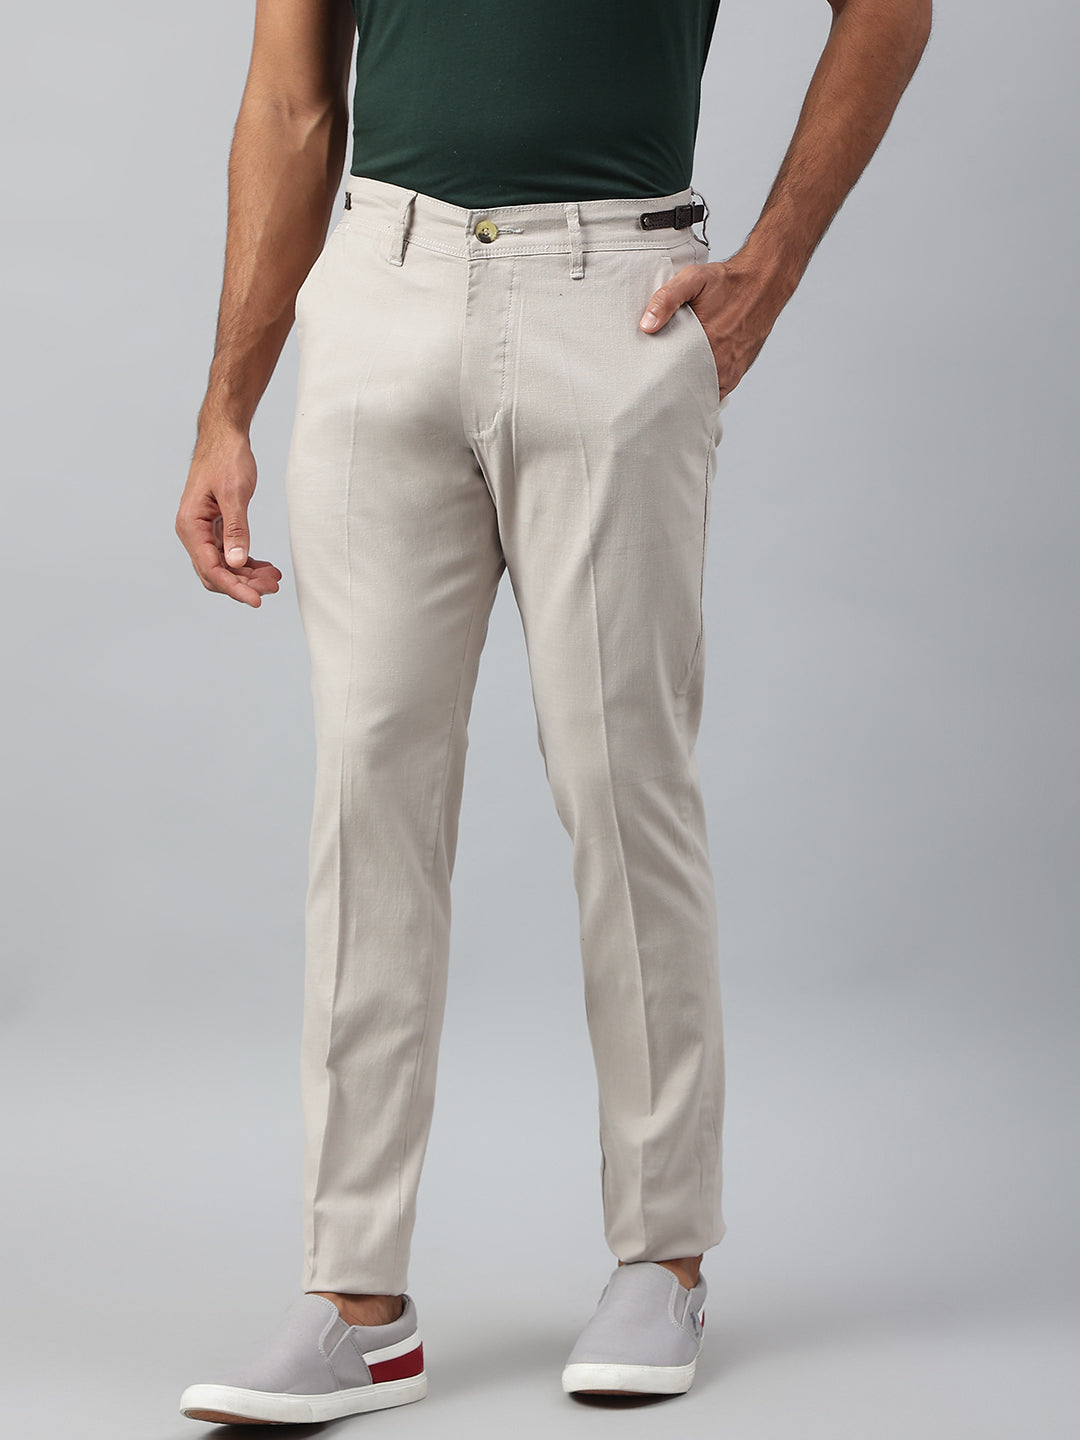 Anor Universe Trouser